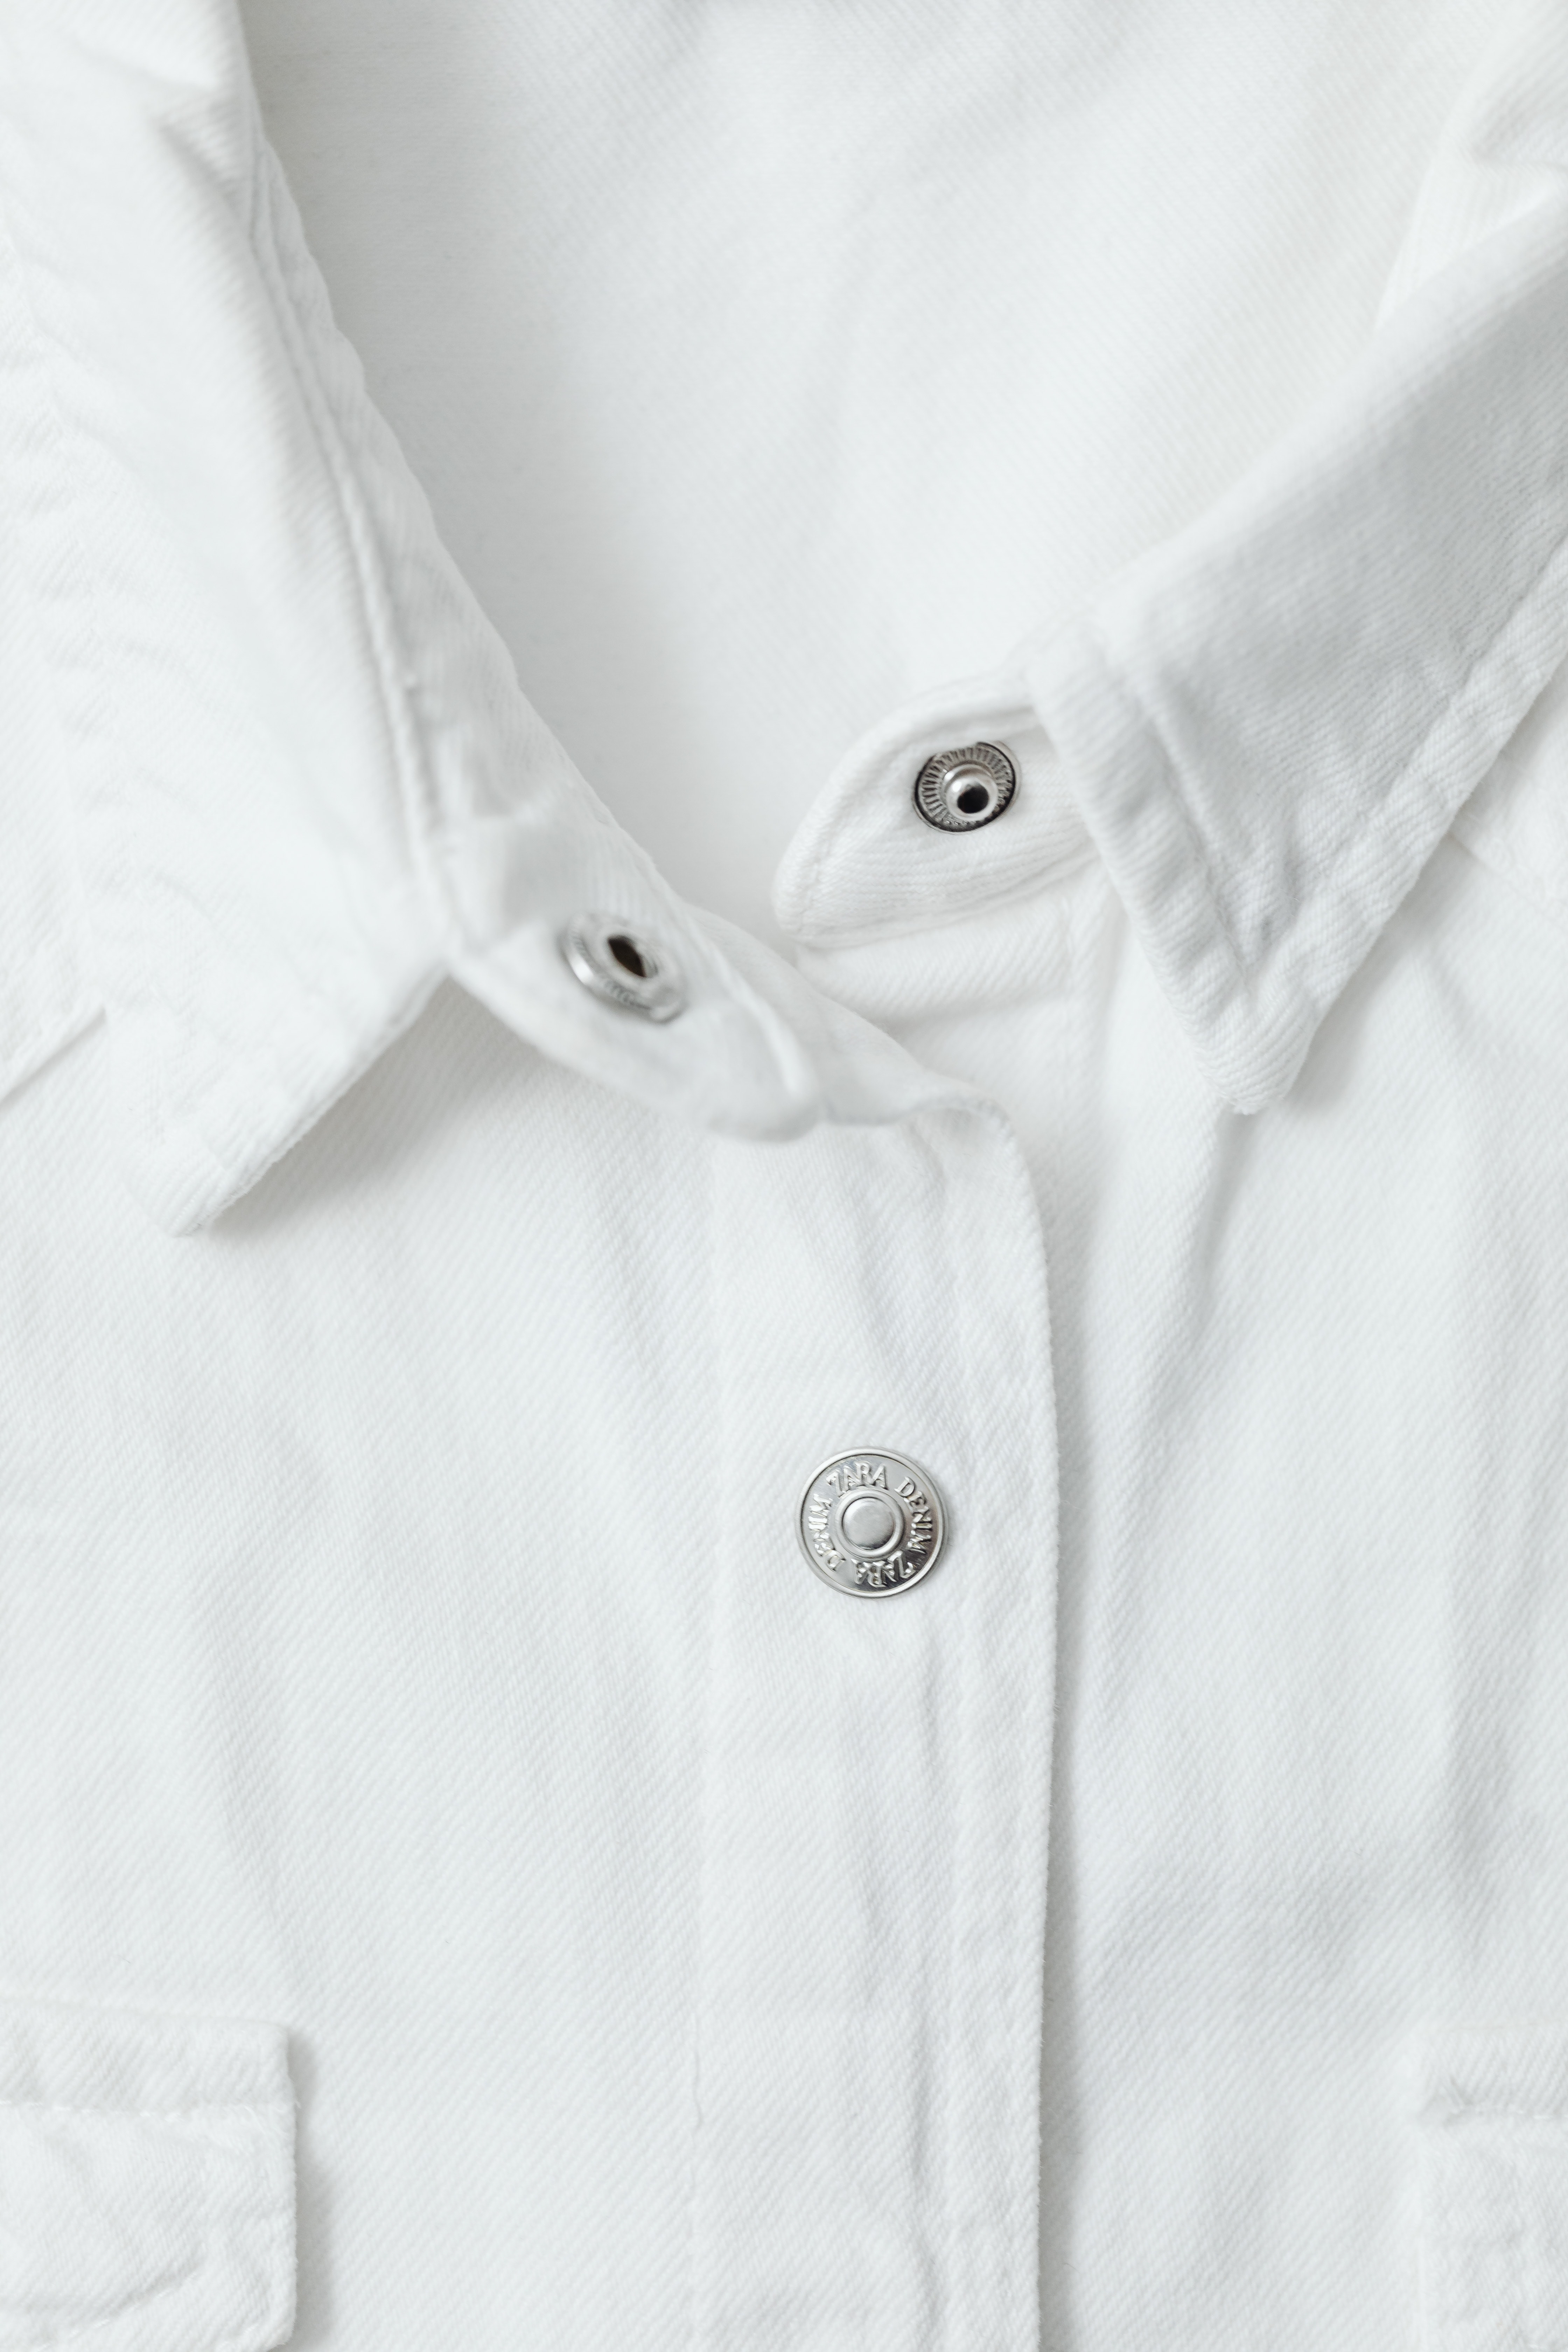 Why Shirts Button on Different Sides For Men and Women